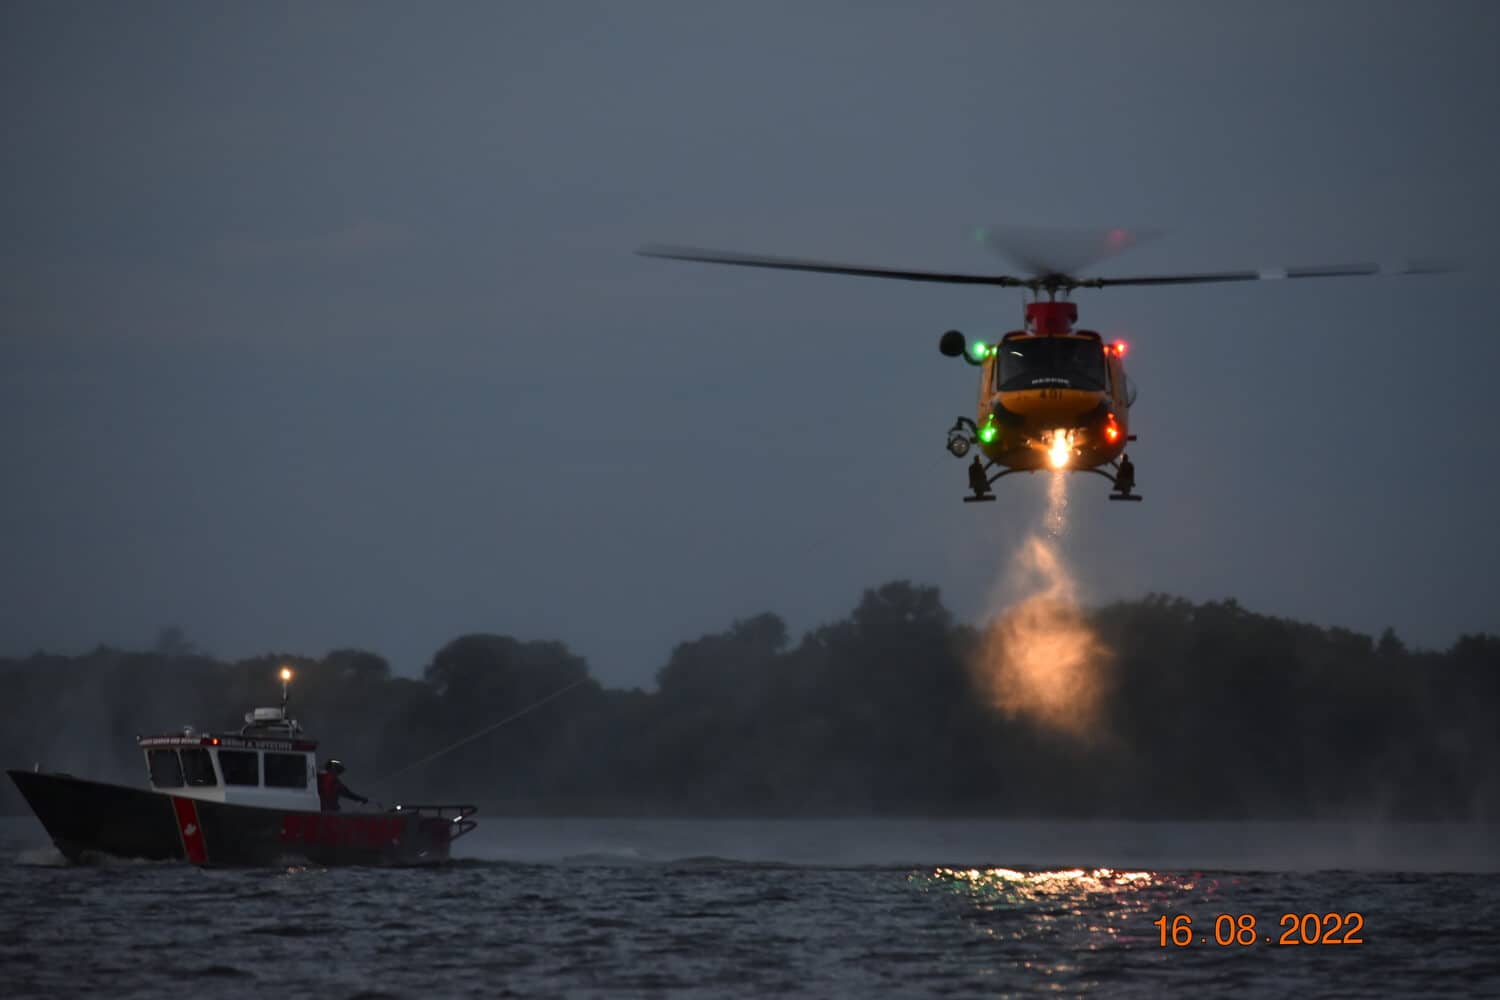 RCAF 491 Helicopter rescue training with the Bruce A Sutcliffe, QSAR, Lake Ontario for the marine surveyor ontario page